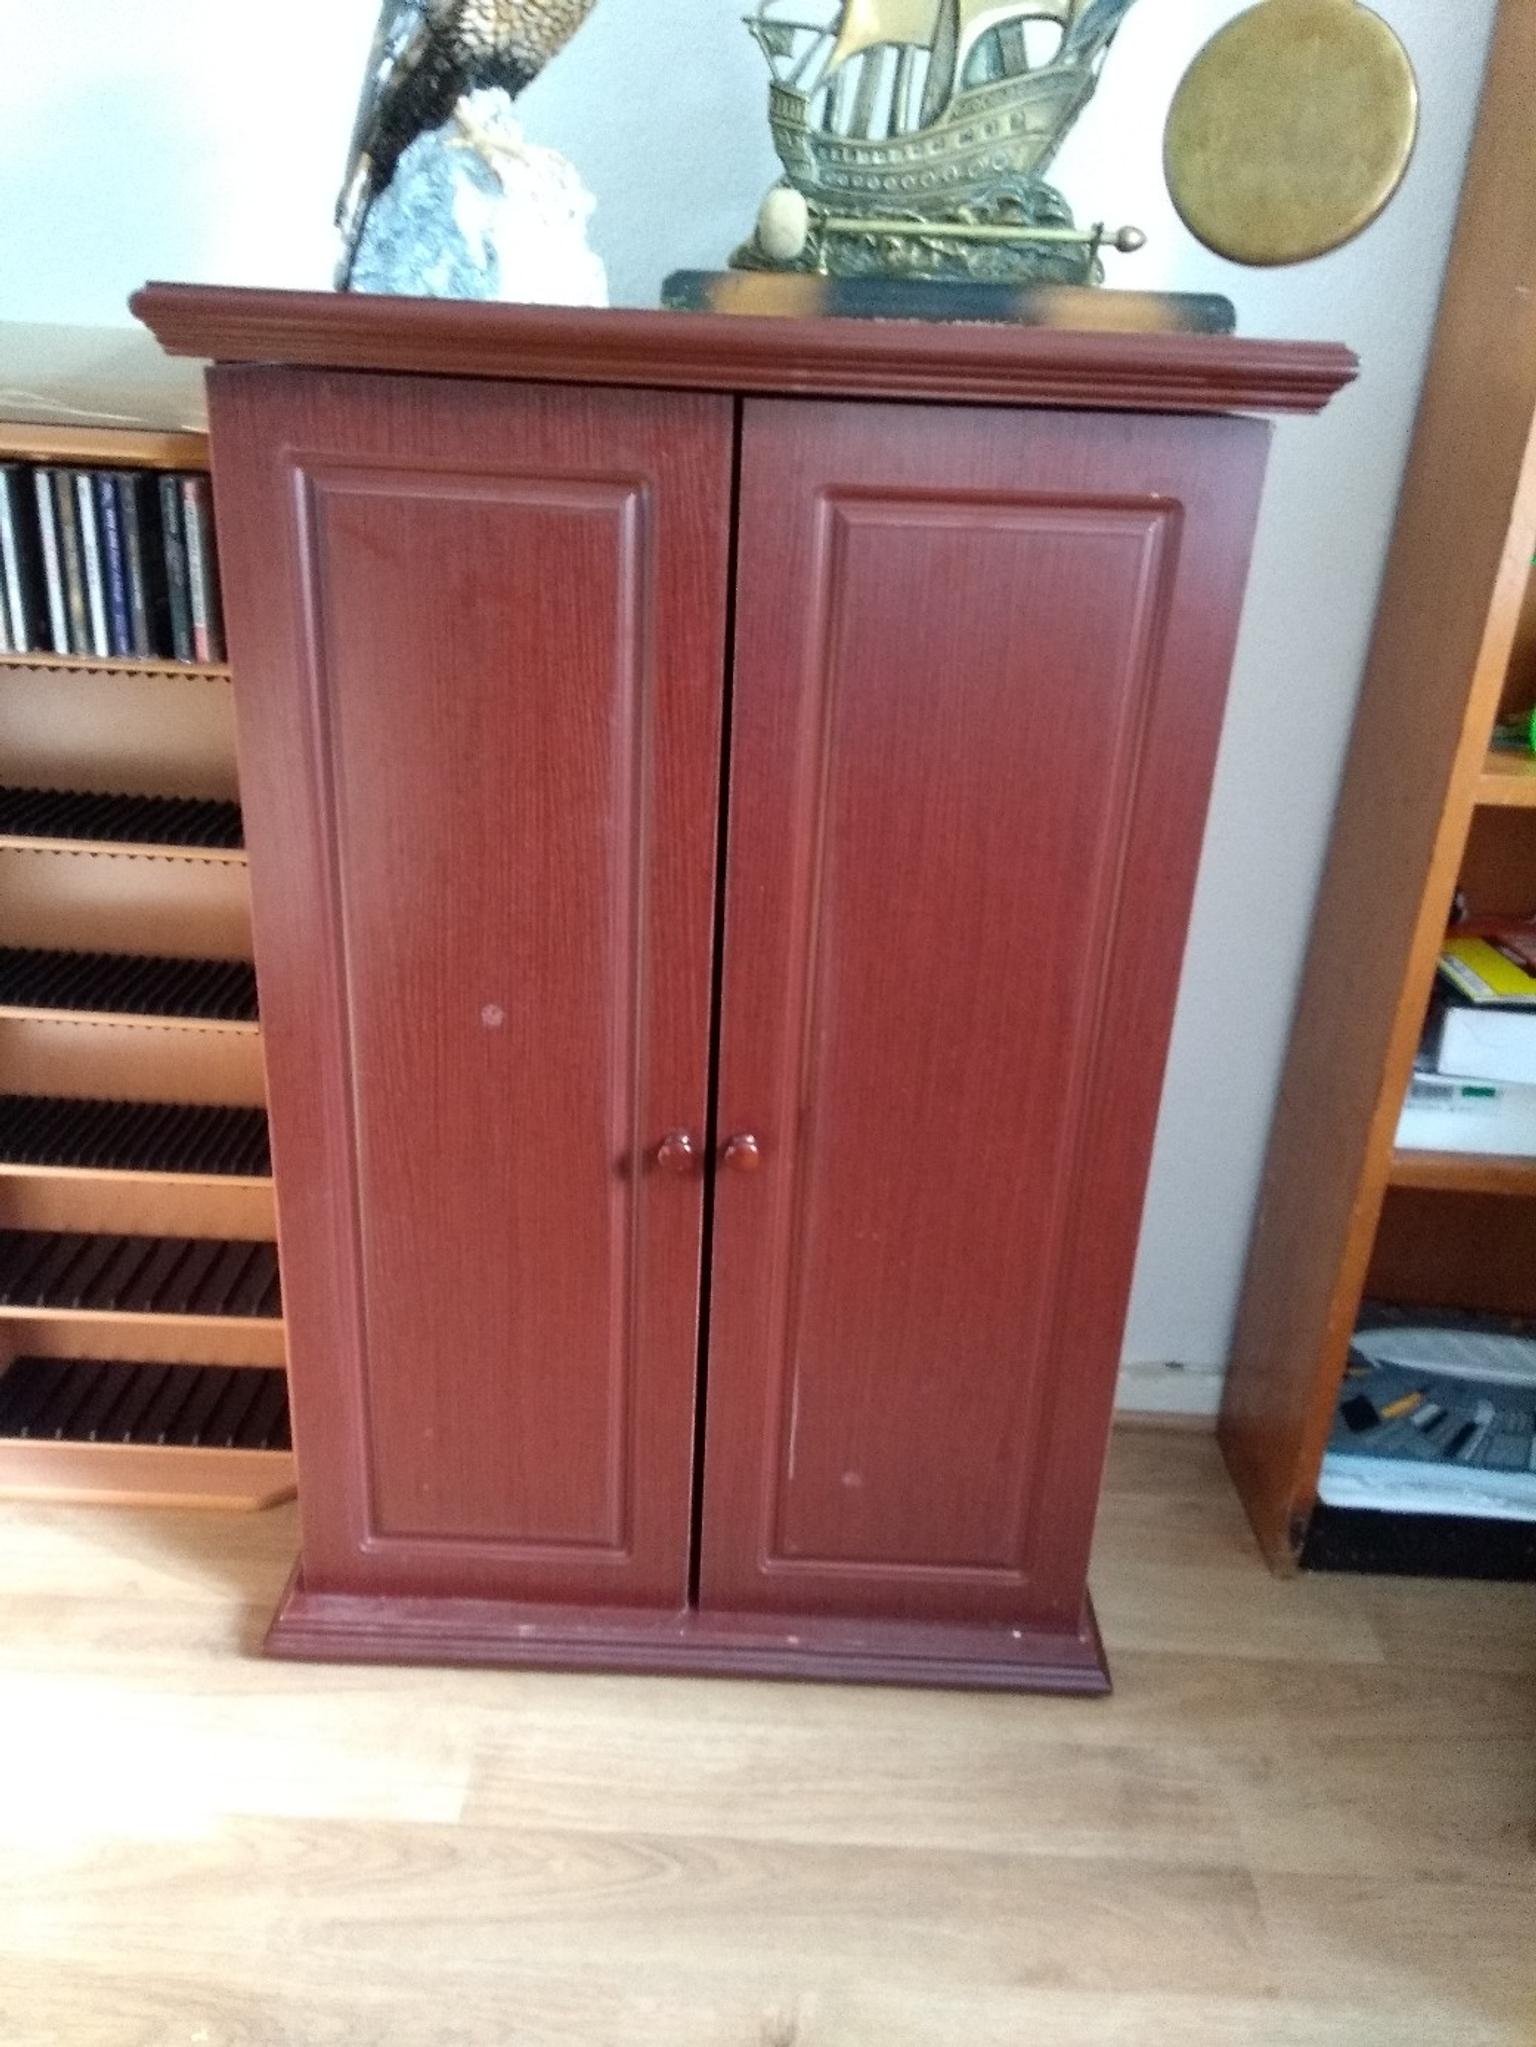 Dvd Cd Storage Cabinet In Harlow For 10 00 For Sale Shpock